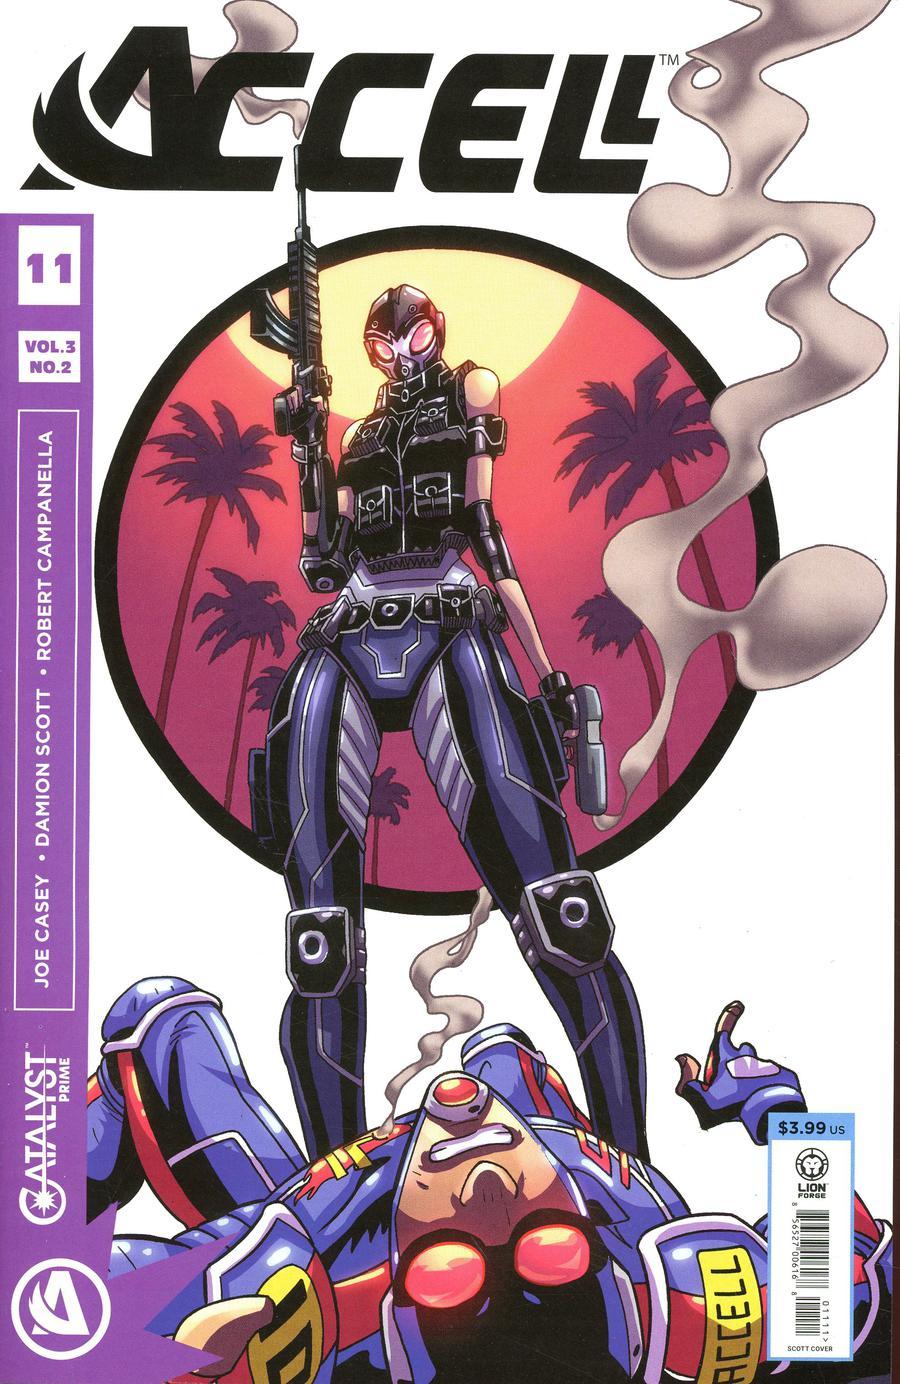 Catalyst Prime Accell Vol. 1 #11